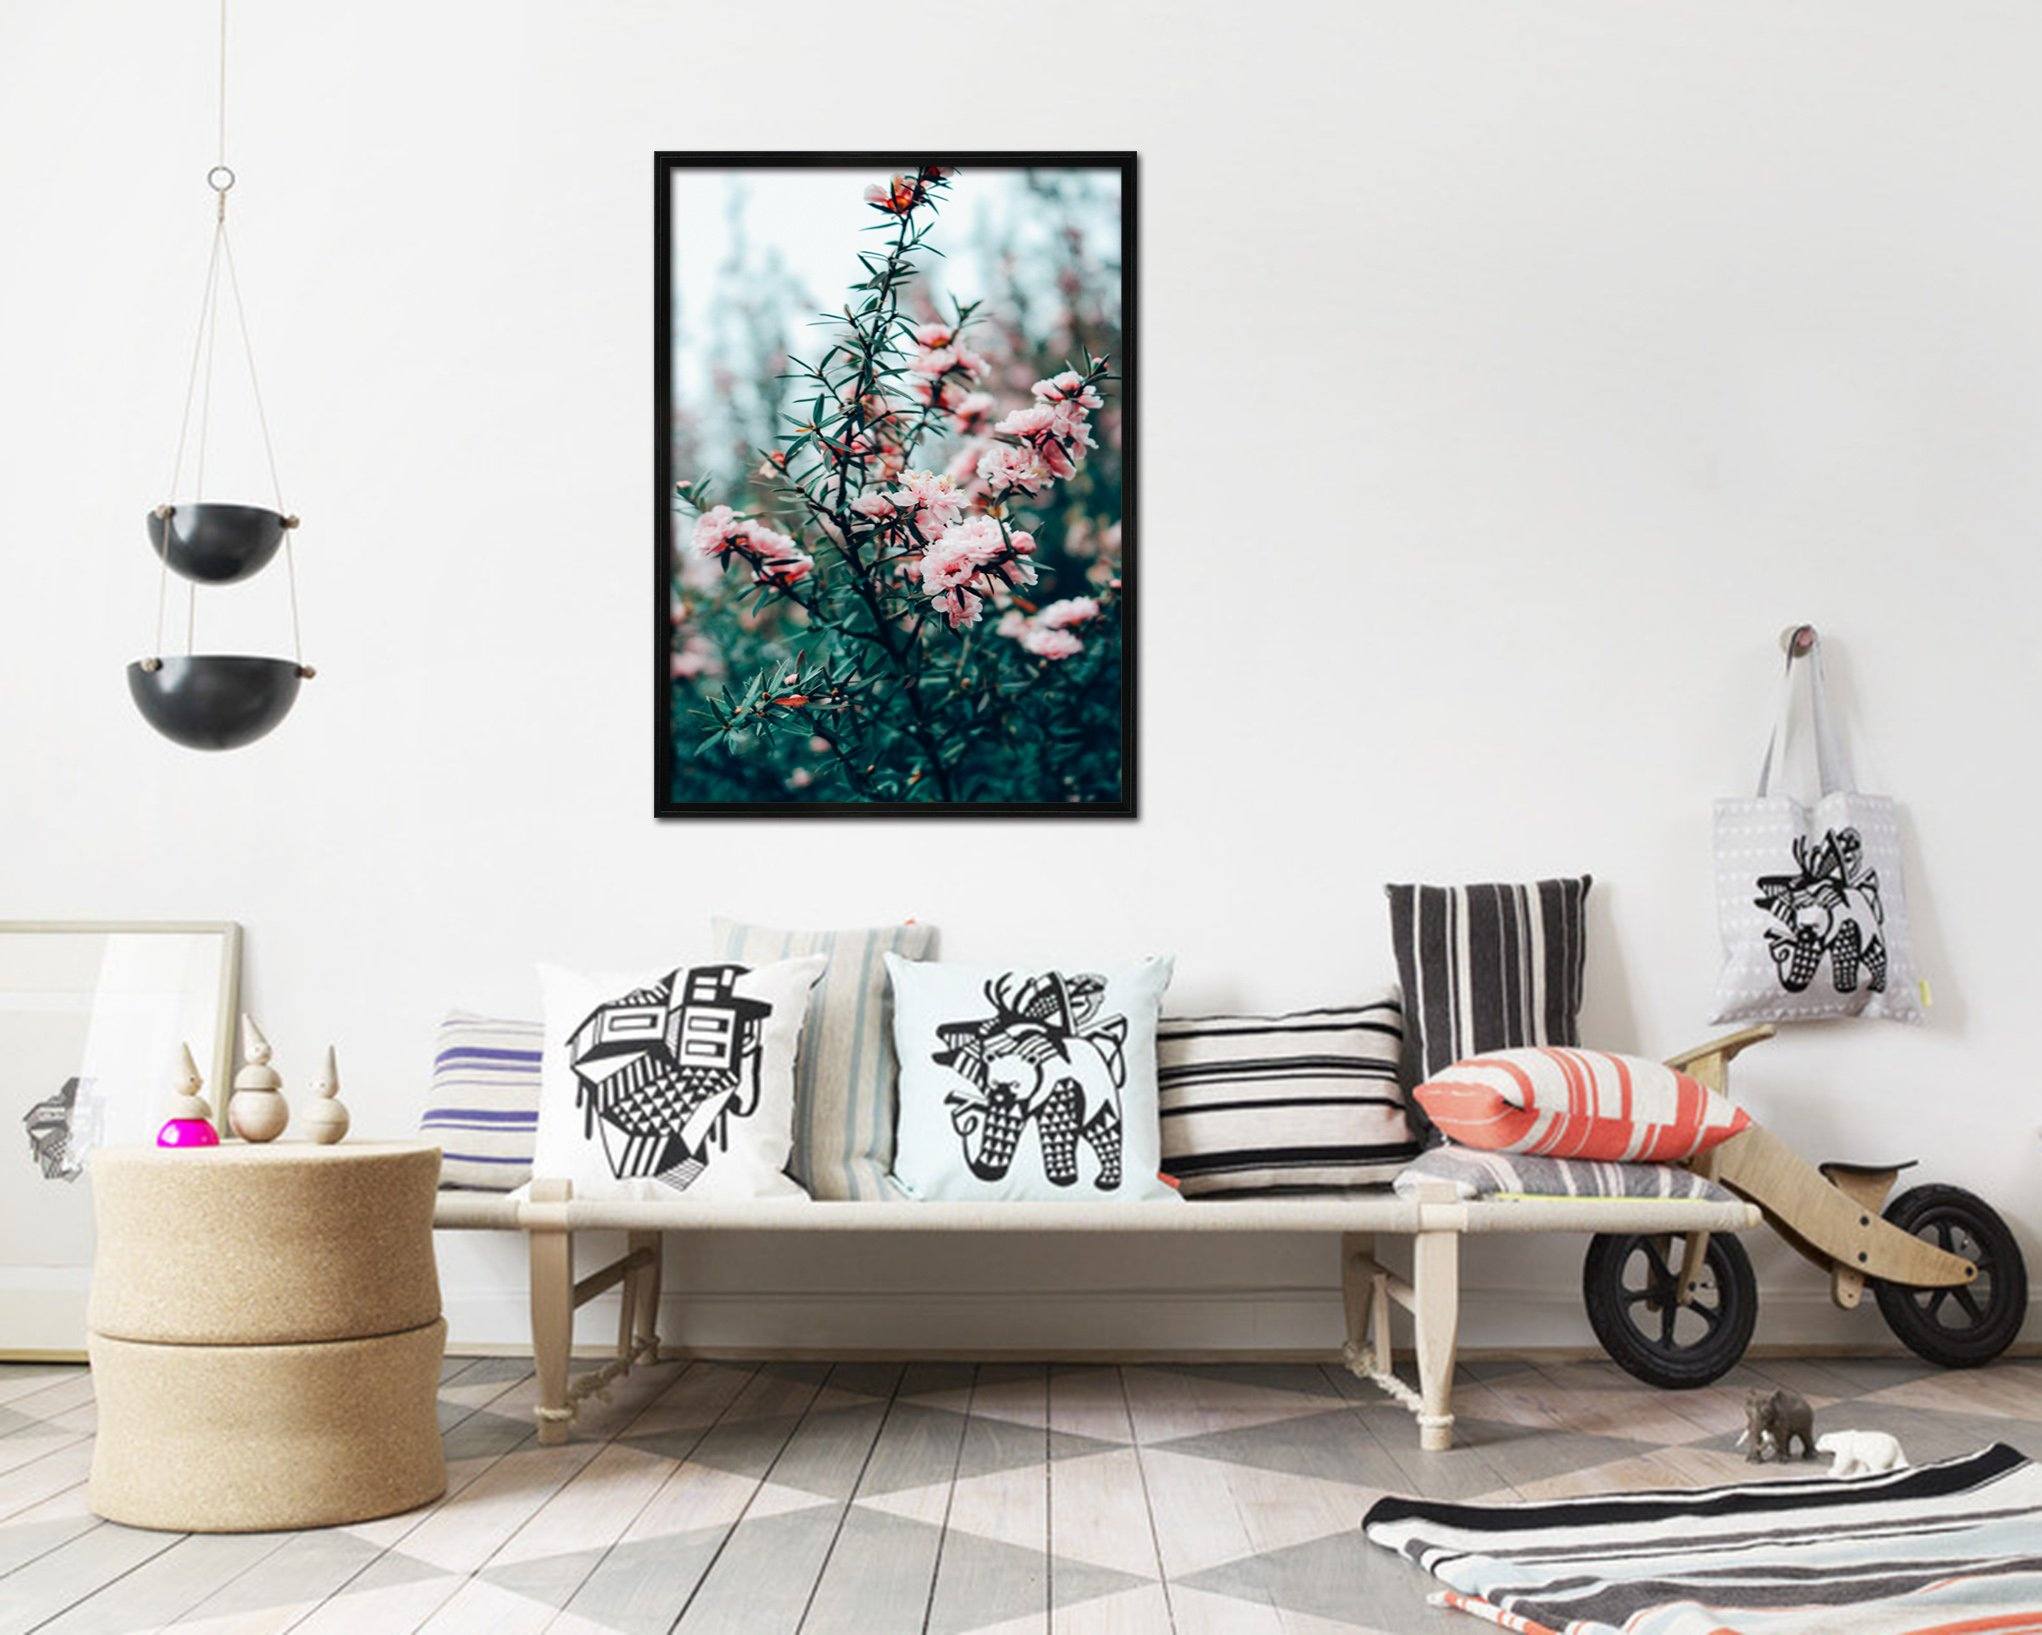 3D Among The Flowers 018 Fake Framed Print Painting Wallpaper AJ Creativity Home 